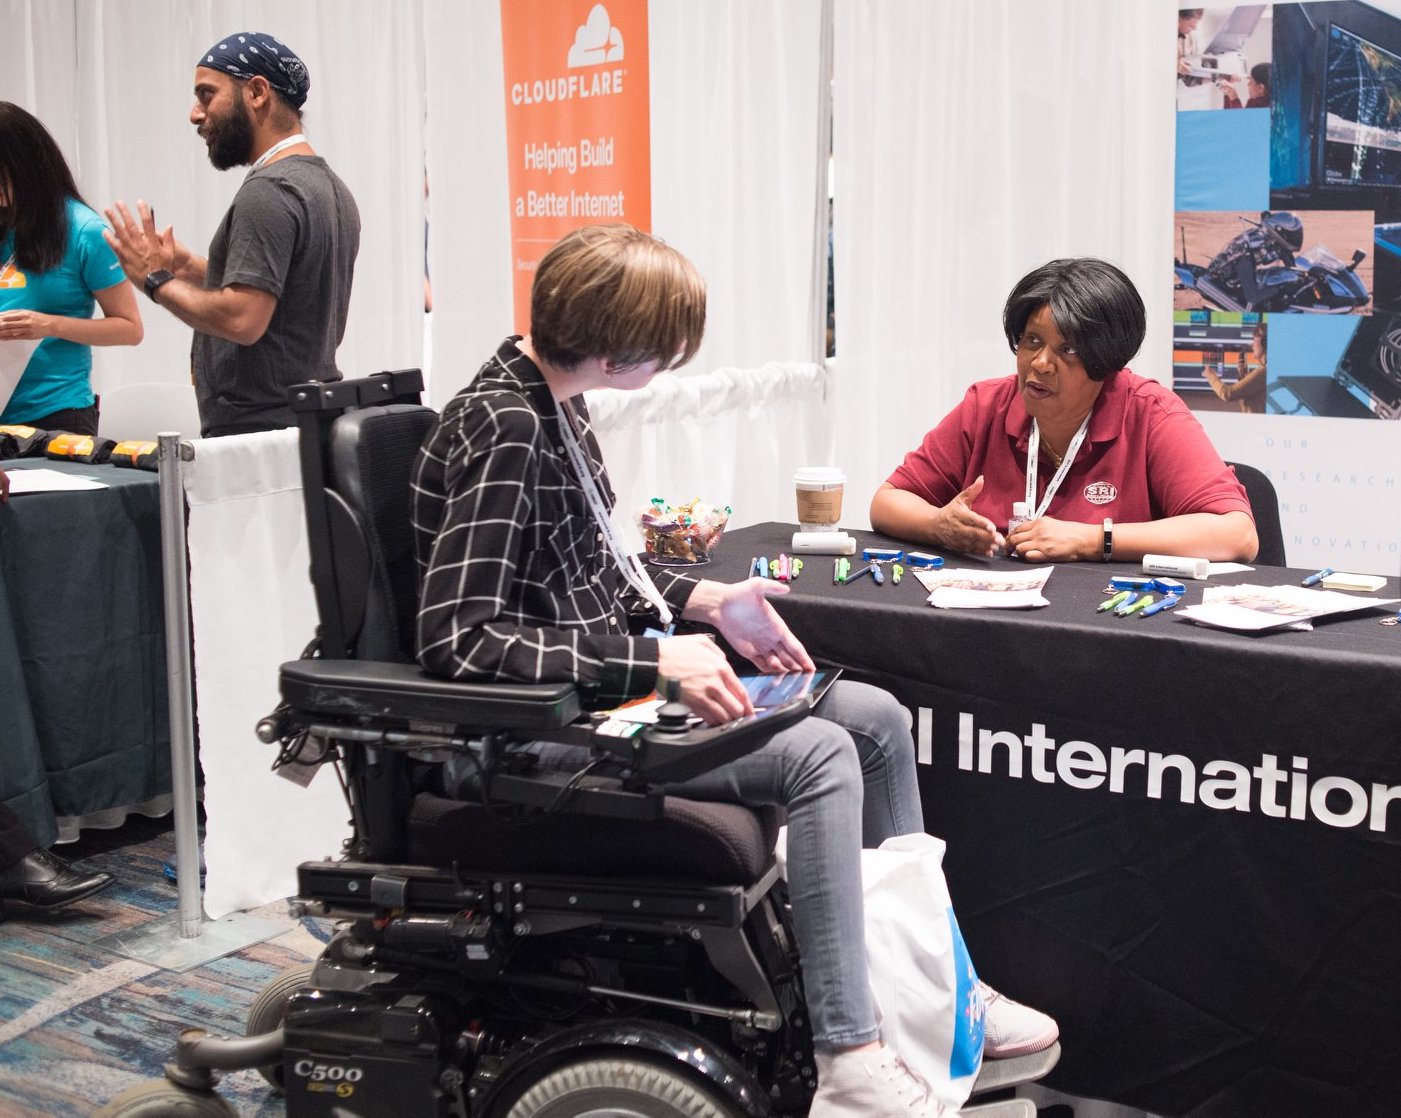 Tapia 2019 conference attendee in wheelchair speaking with conference recruiter who is seated at a table